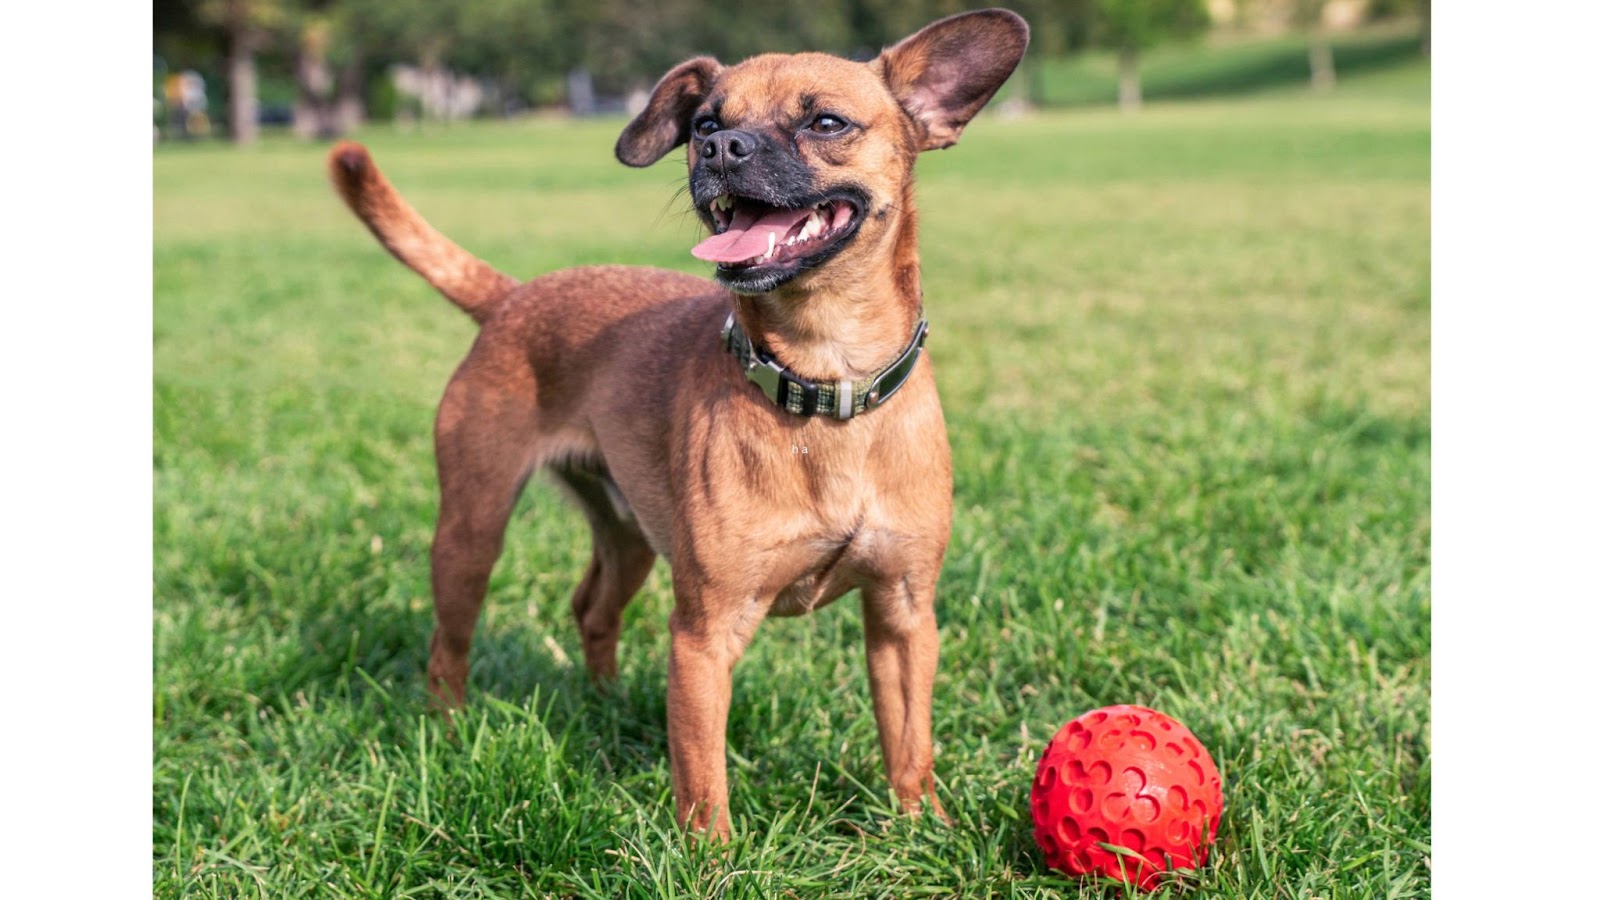 close up of a chiweenie dog on a lawn standing next to red ball